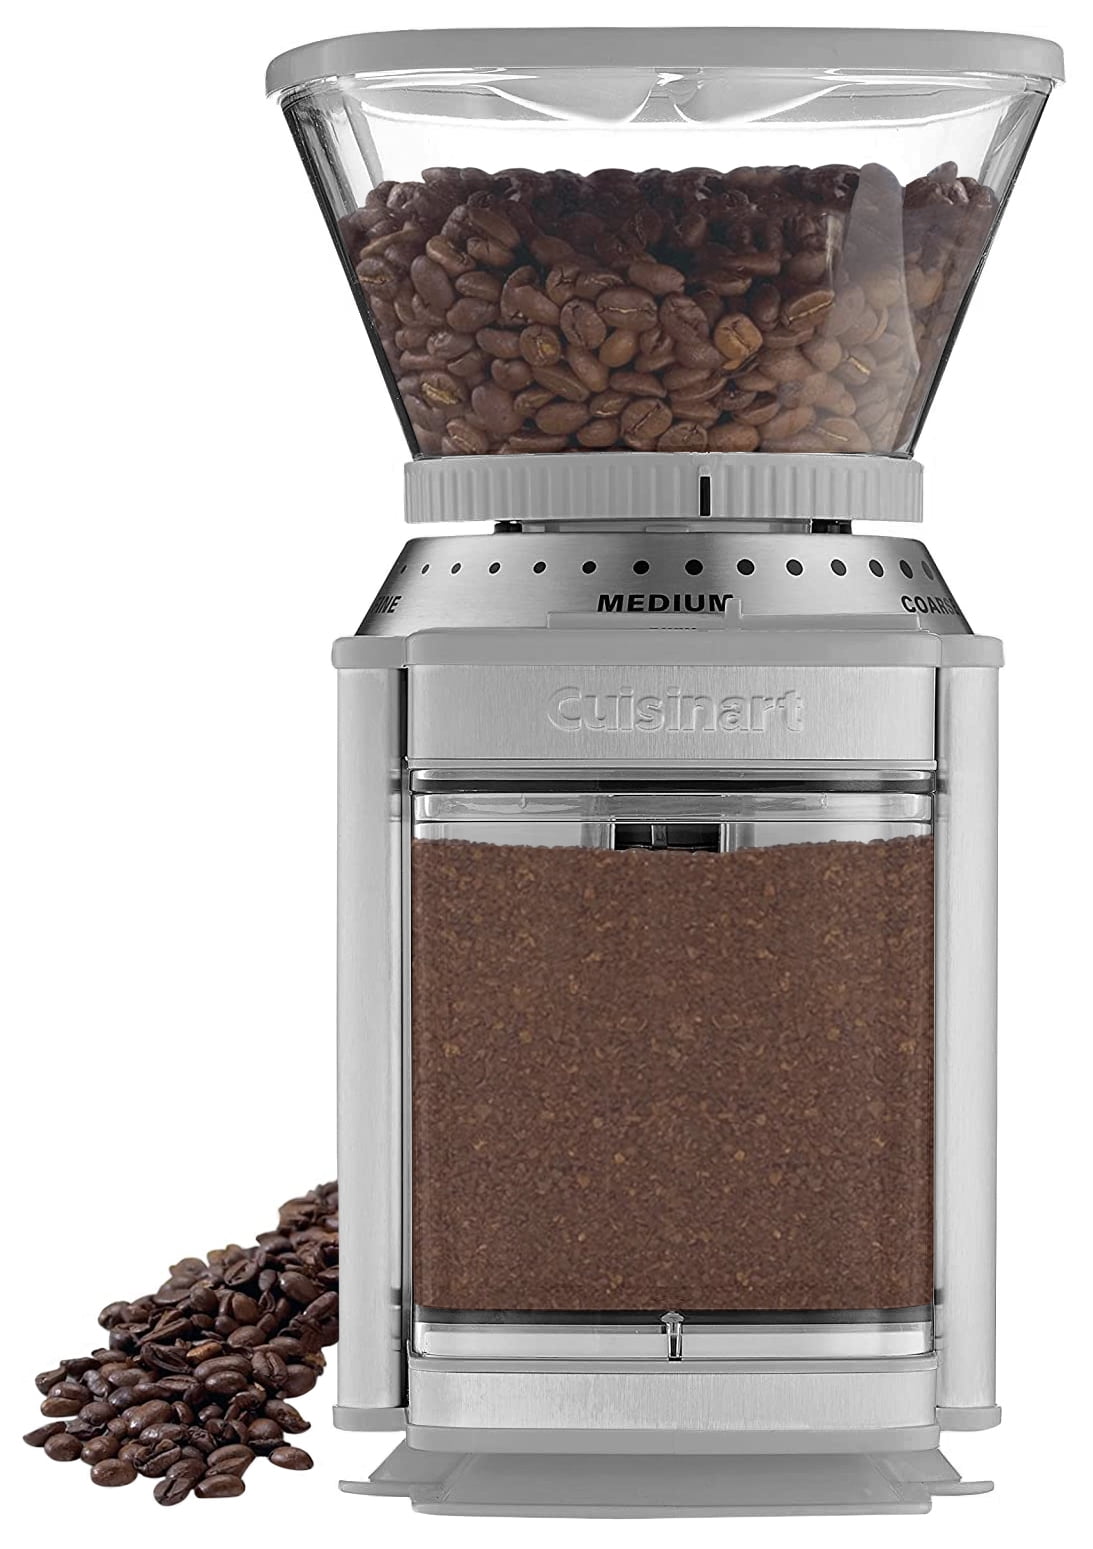 Cuisinart Supreme Grind Automatic Burr Mill Coffee Grinder 1/2